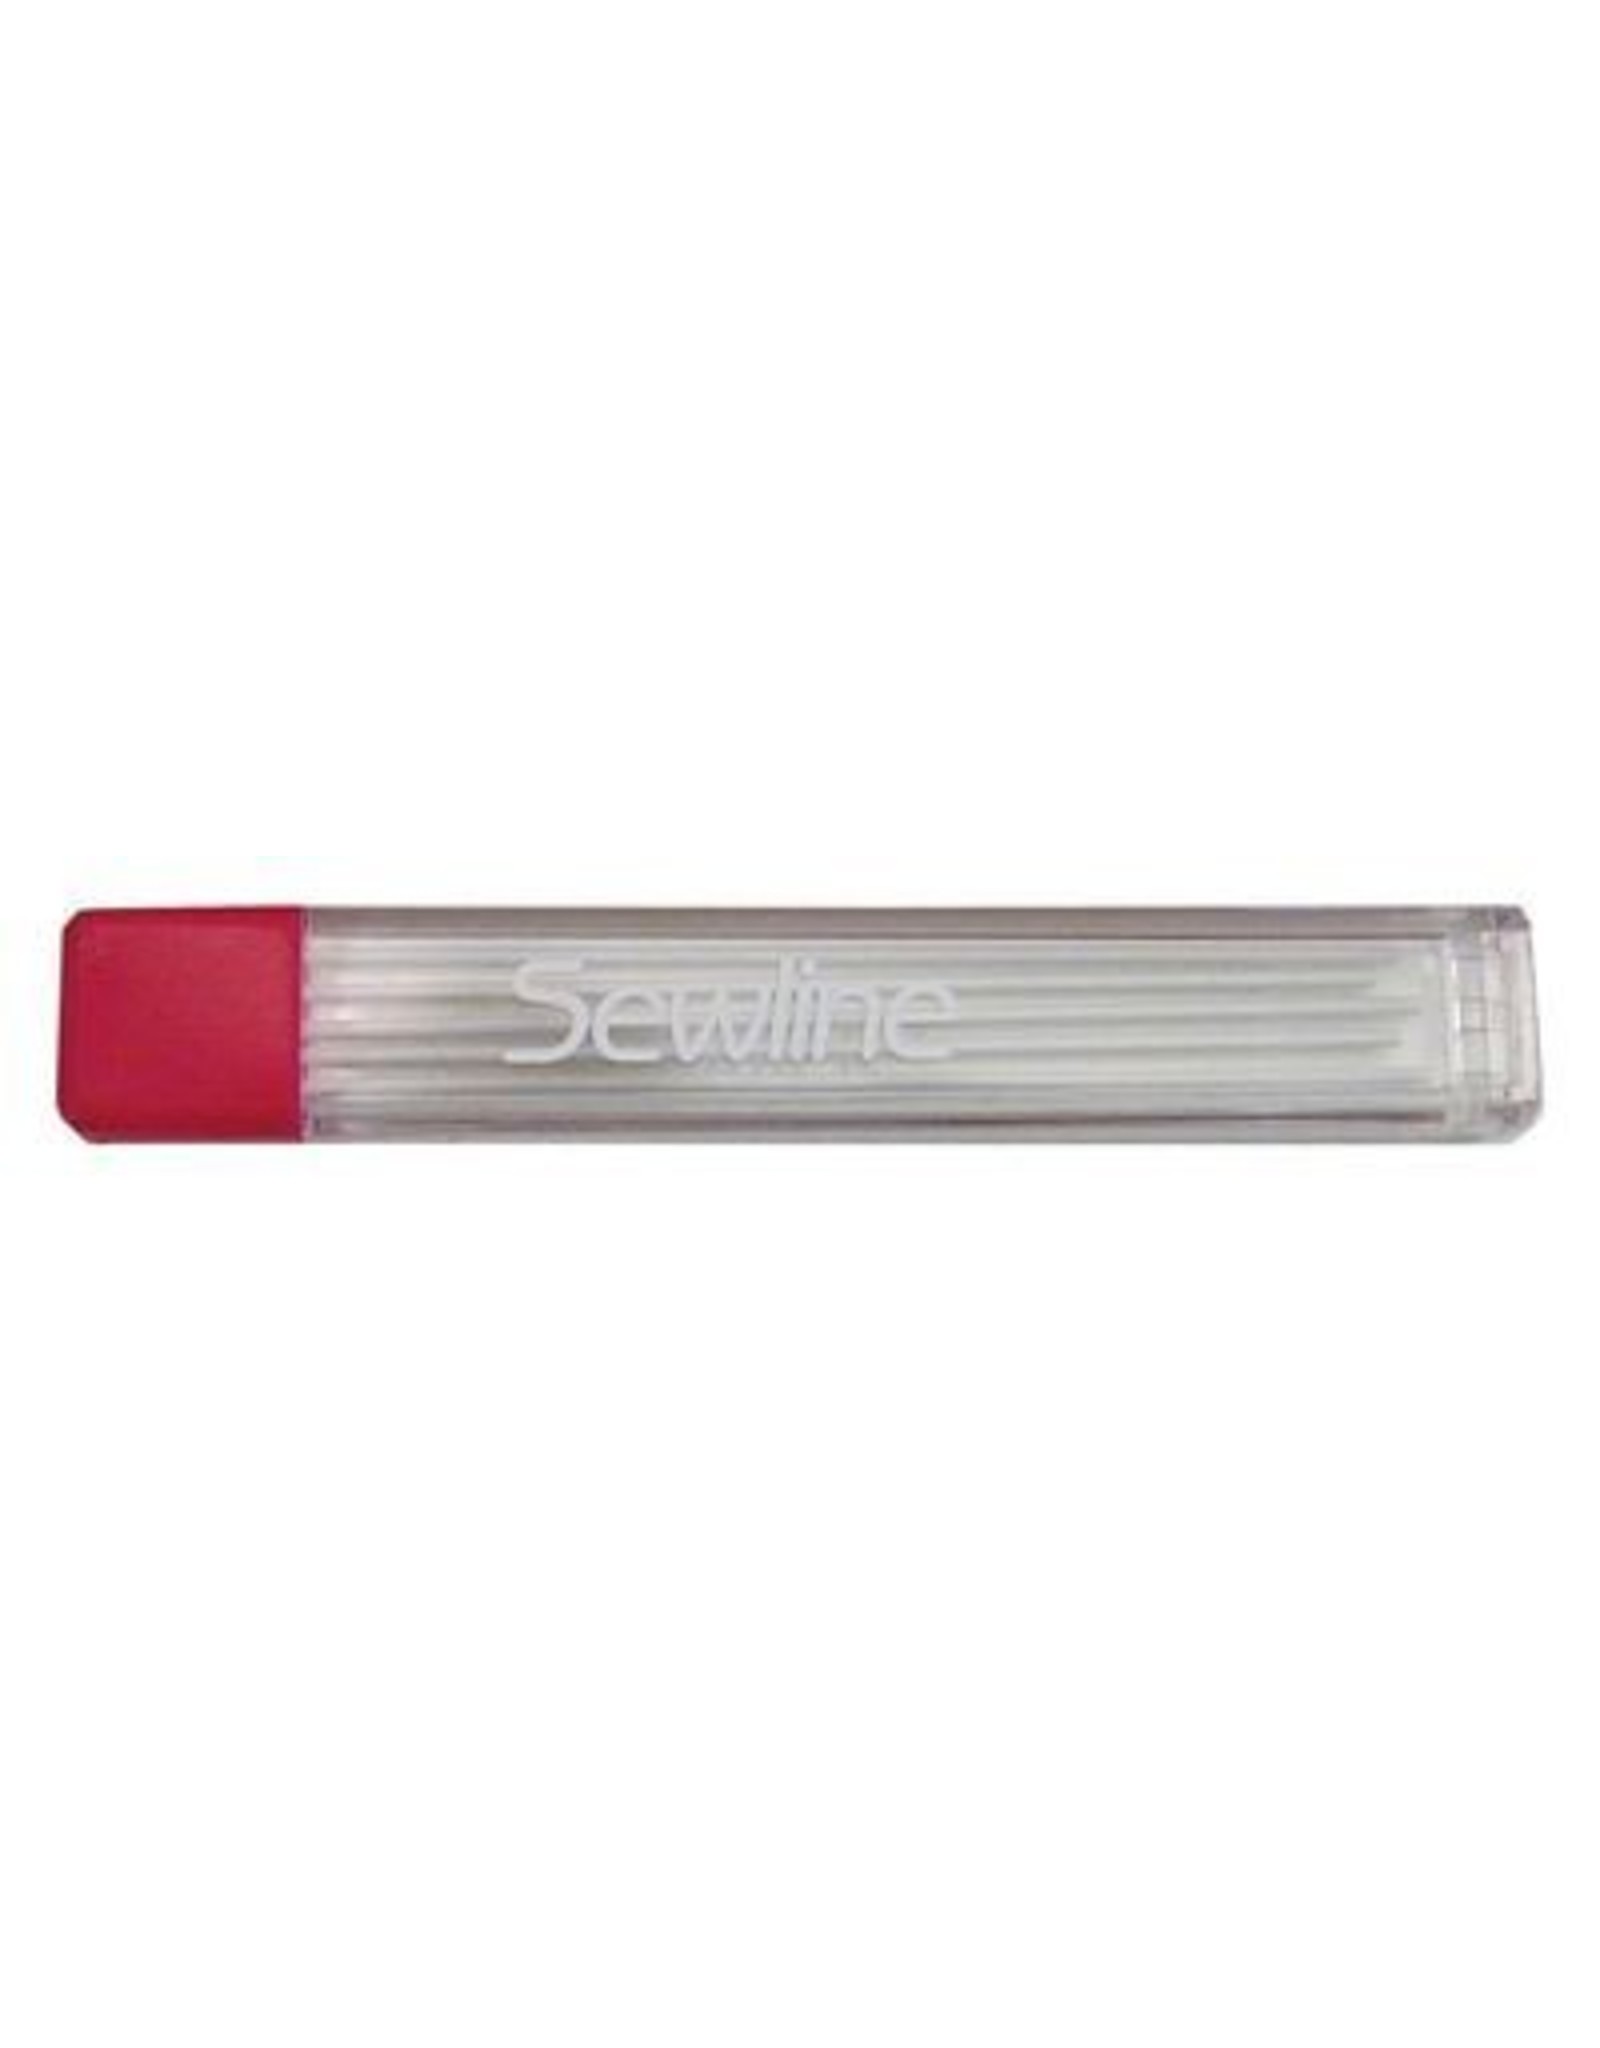 Sewline White Fabric Mechanical Pencil & Refill by Sewline 